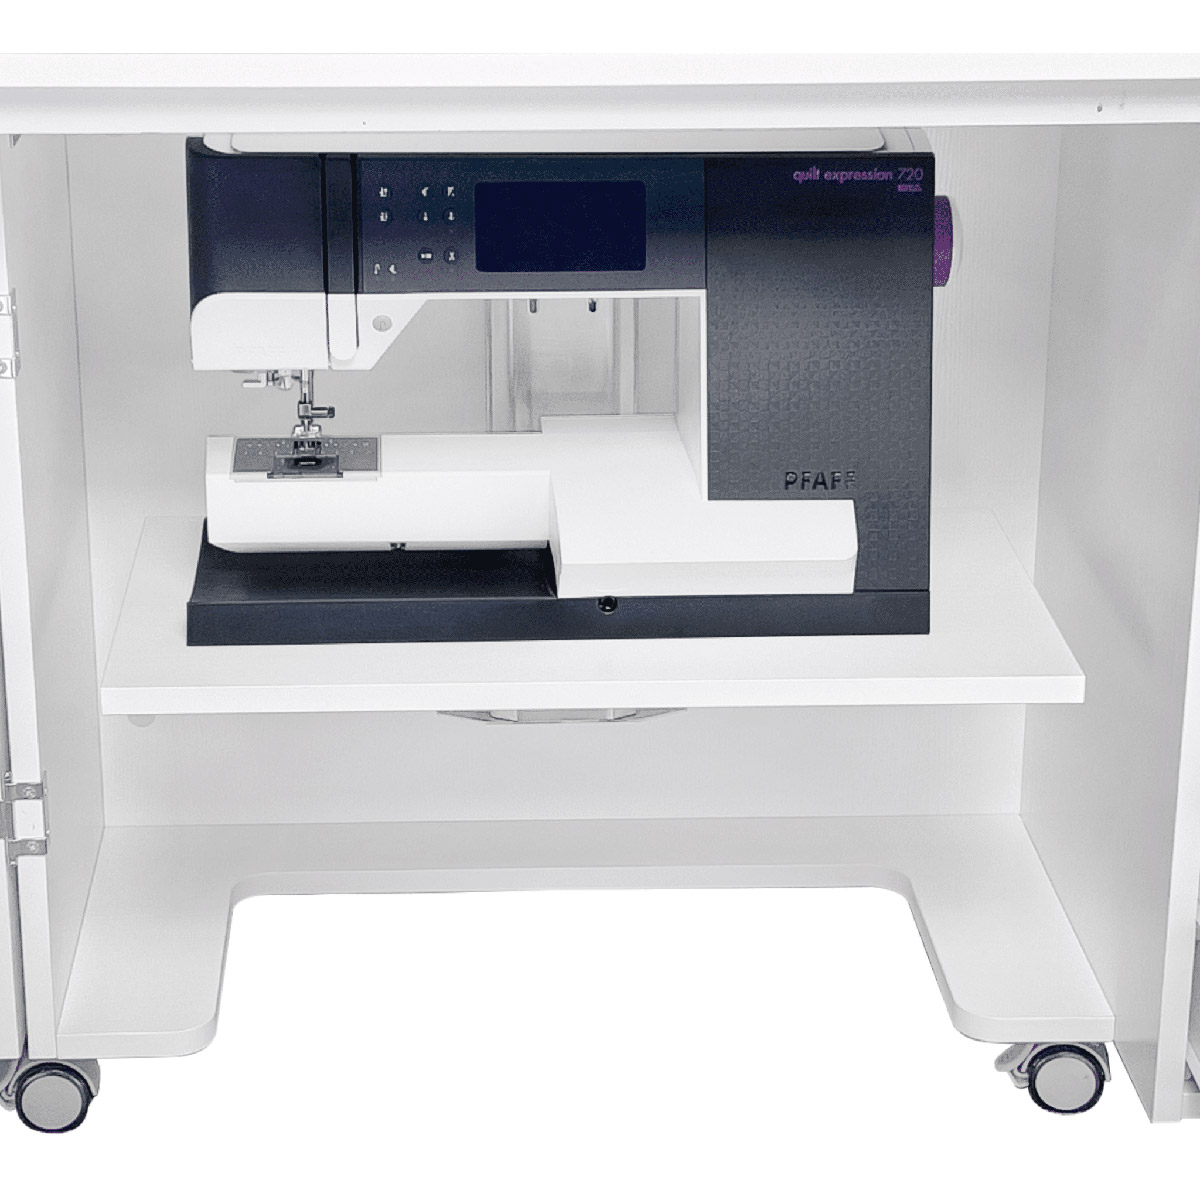 Storage position is the lowest lift position, to store the machine behind the doors of the Quilter's Petite cabinet